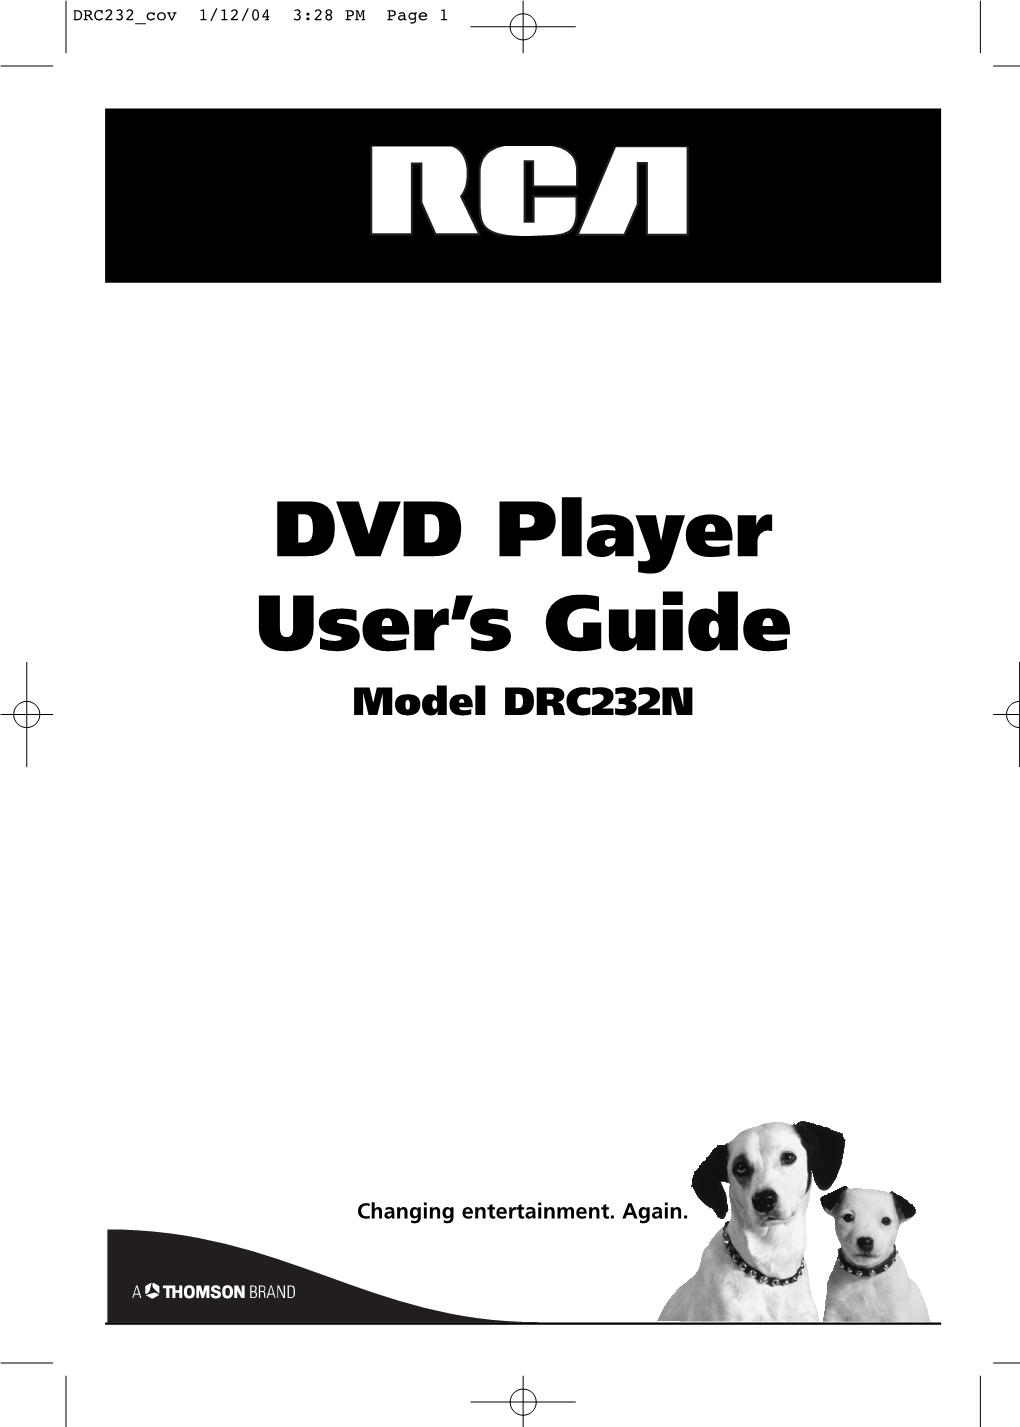 DVD Player User's Guide